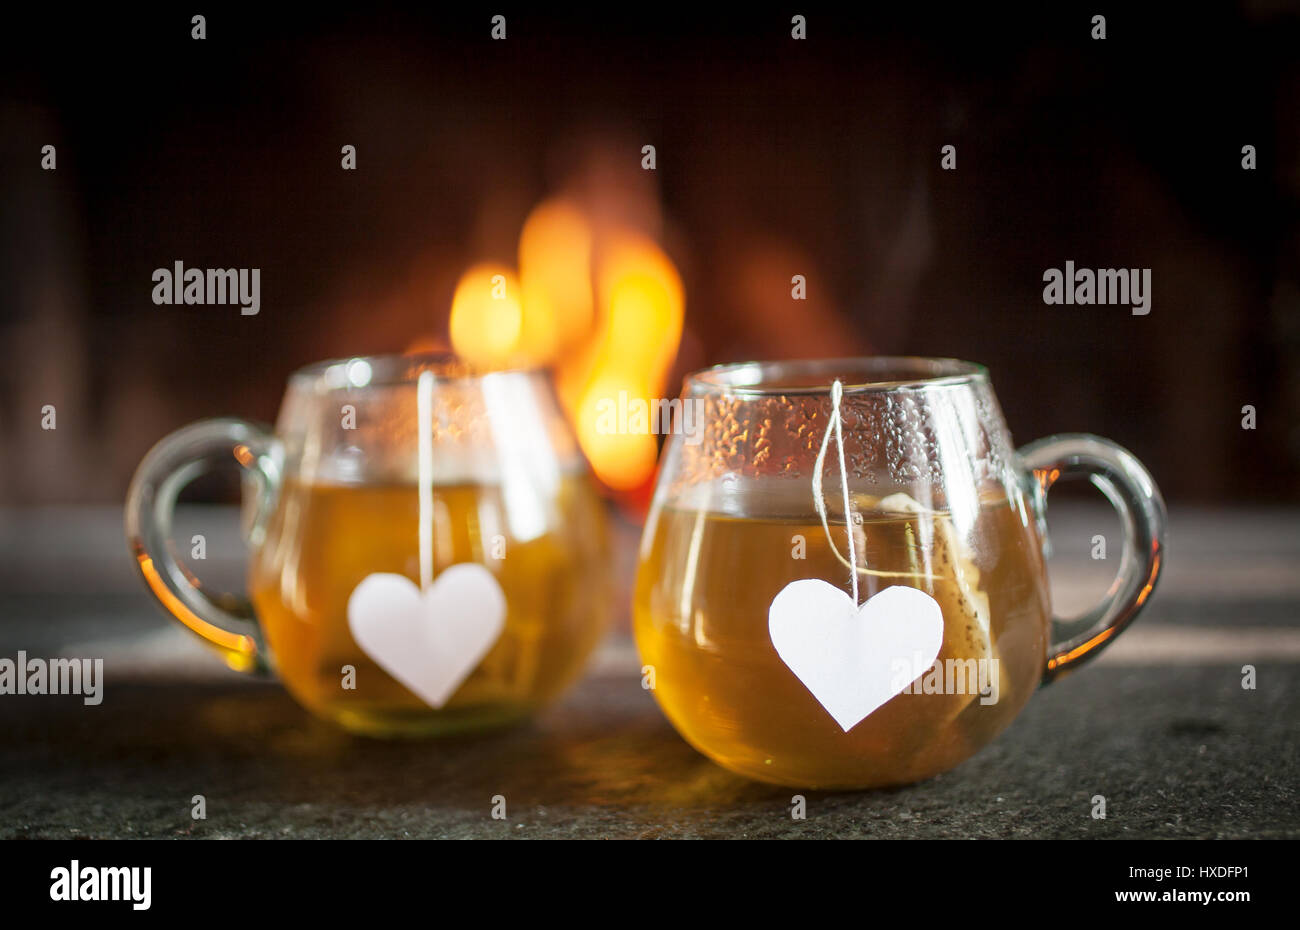 Tea for two by the fireplace Stock Photo